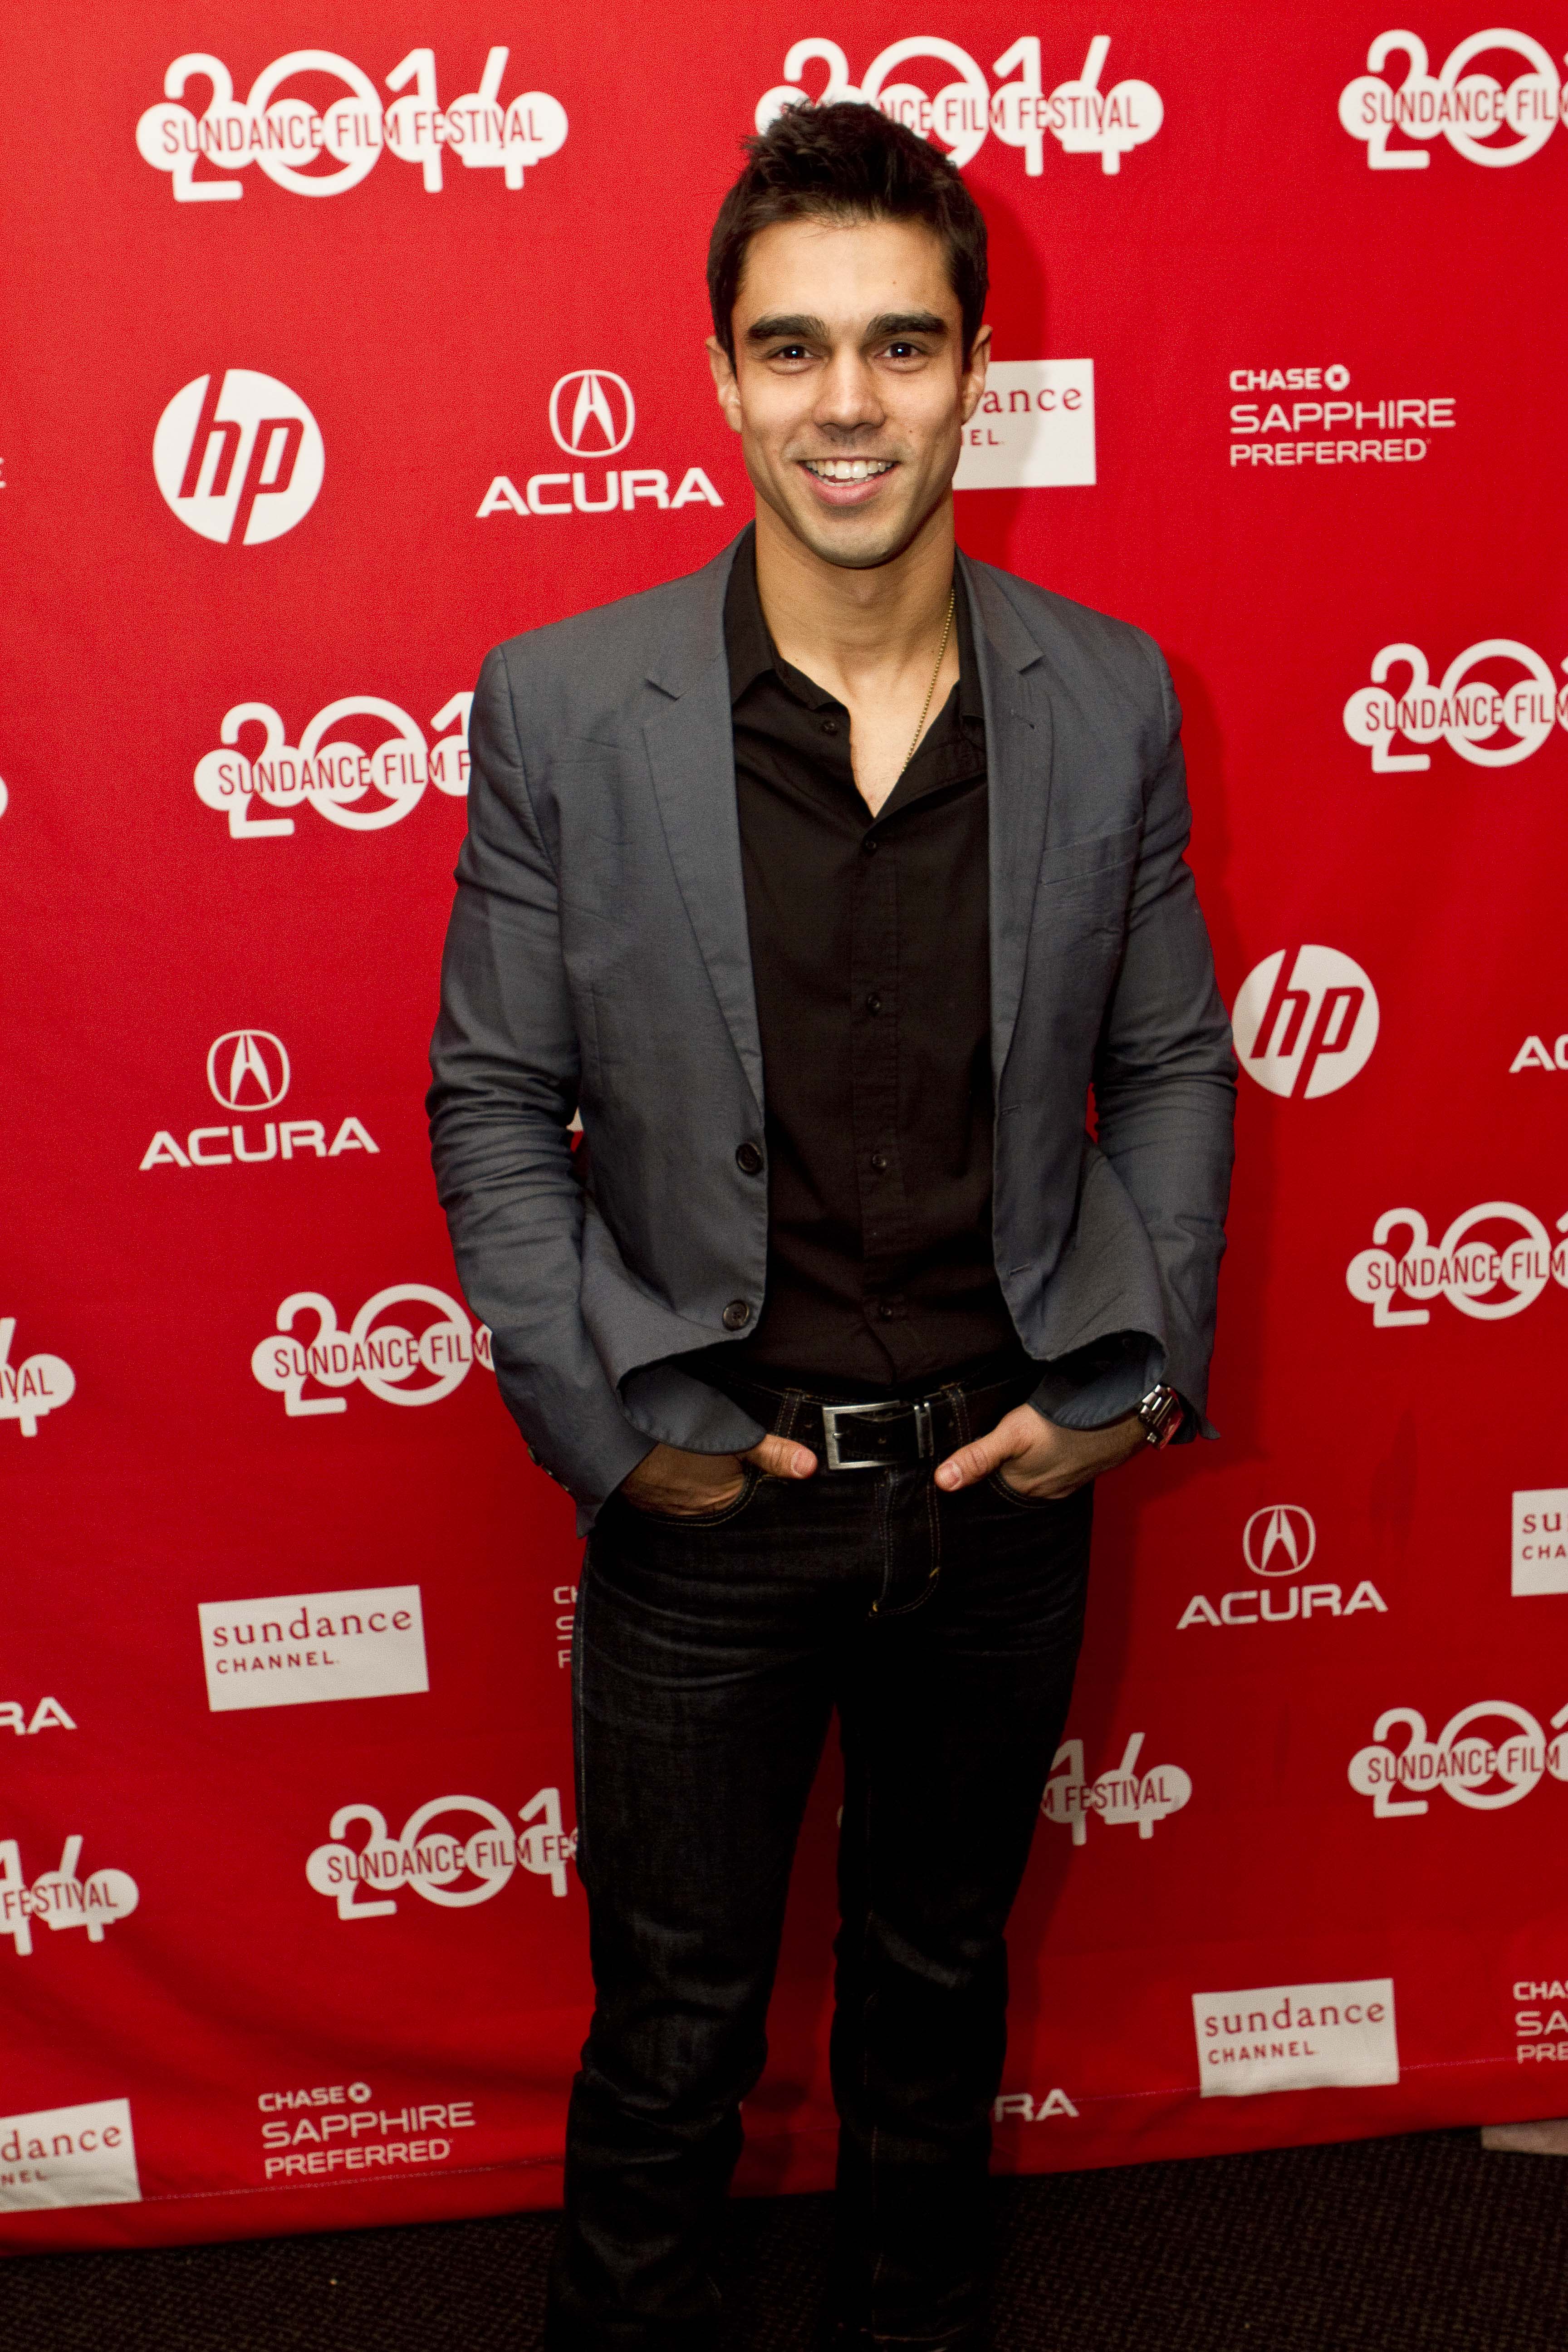 Jorge Luna Premiere of All the Beautiful Things at the 2014 Sundance Film Festival. January 2014.